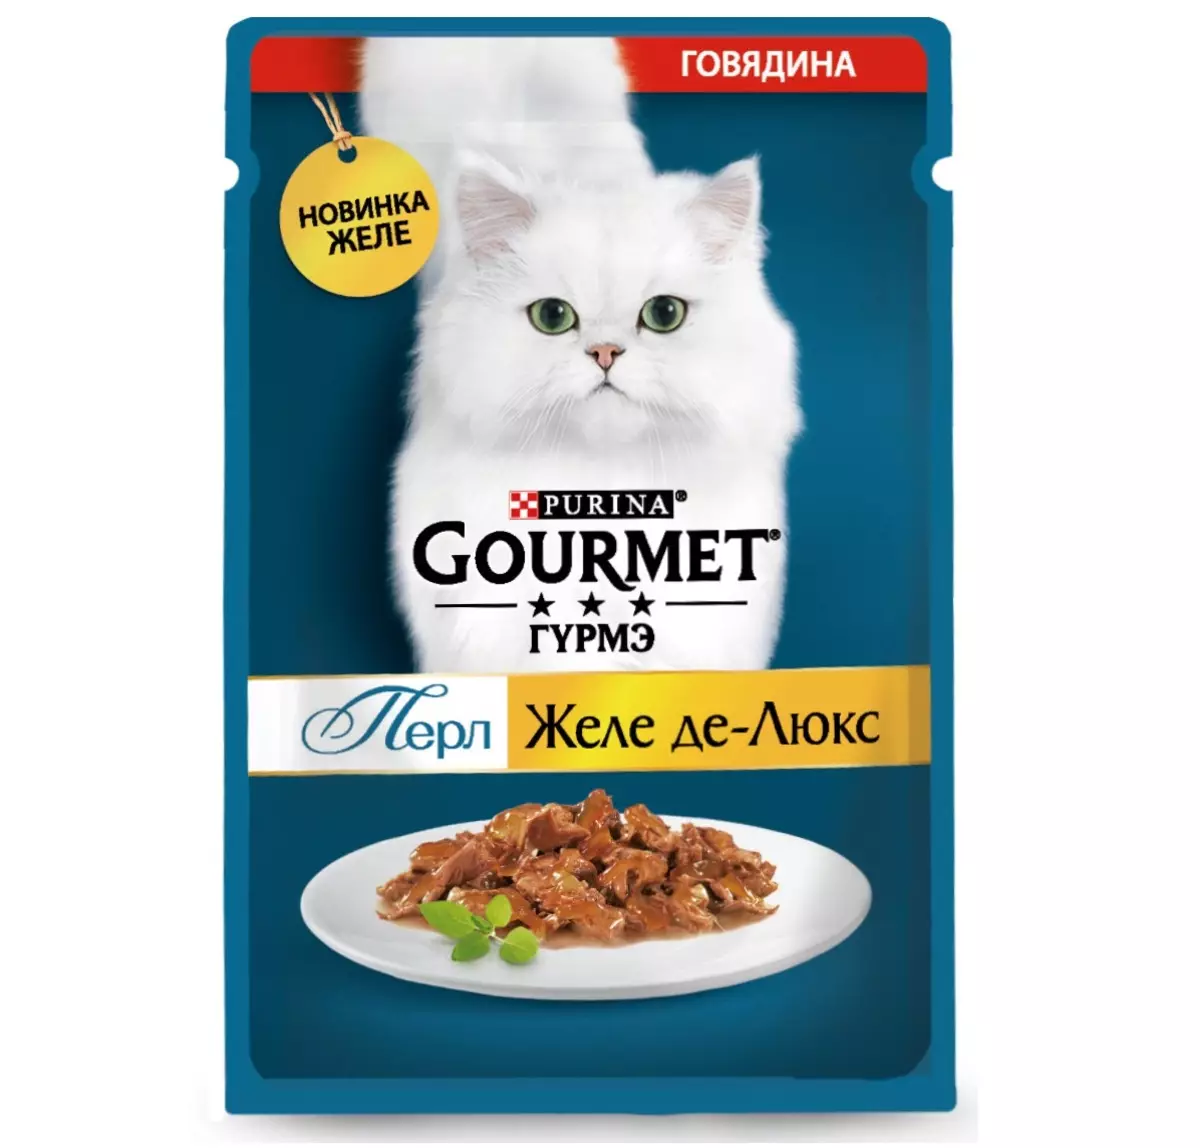 Gourmet: cat feed and purina kittens, wet pates and other feline canned food, their composition, reviews 22711_31